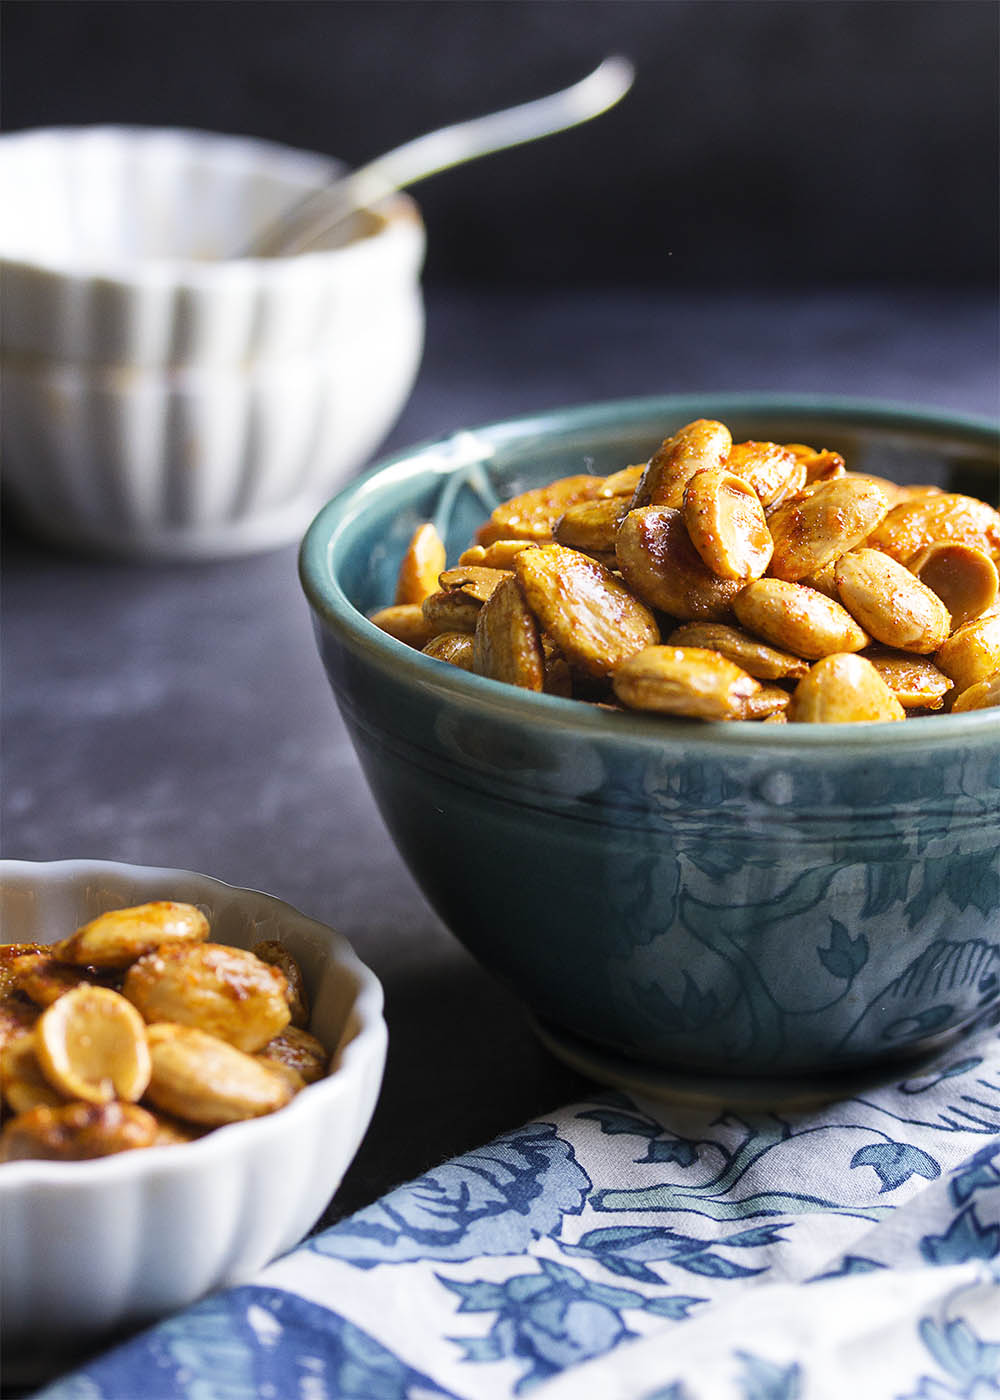 Spanish Spiced Almonds - Creamy, sweet marcona almonds are toasted and tossed in a flavorful paprika-spiked spice blend in this recipe for Spanish spiced almonds. | justalittlebitofbacon.com